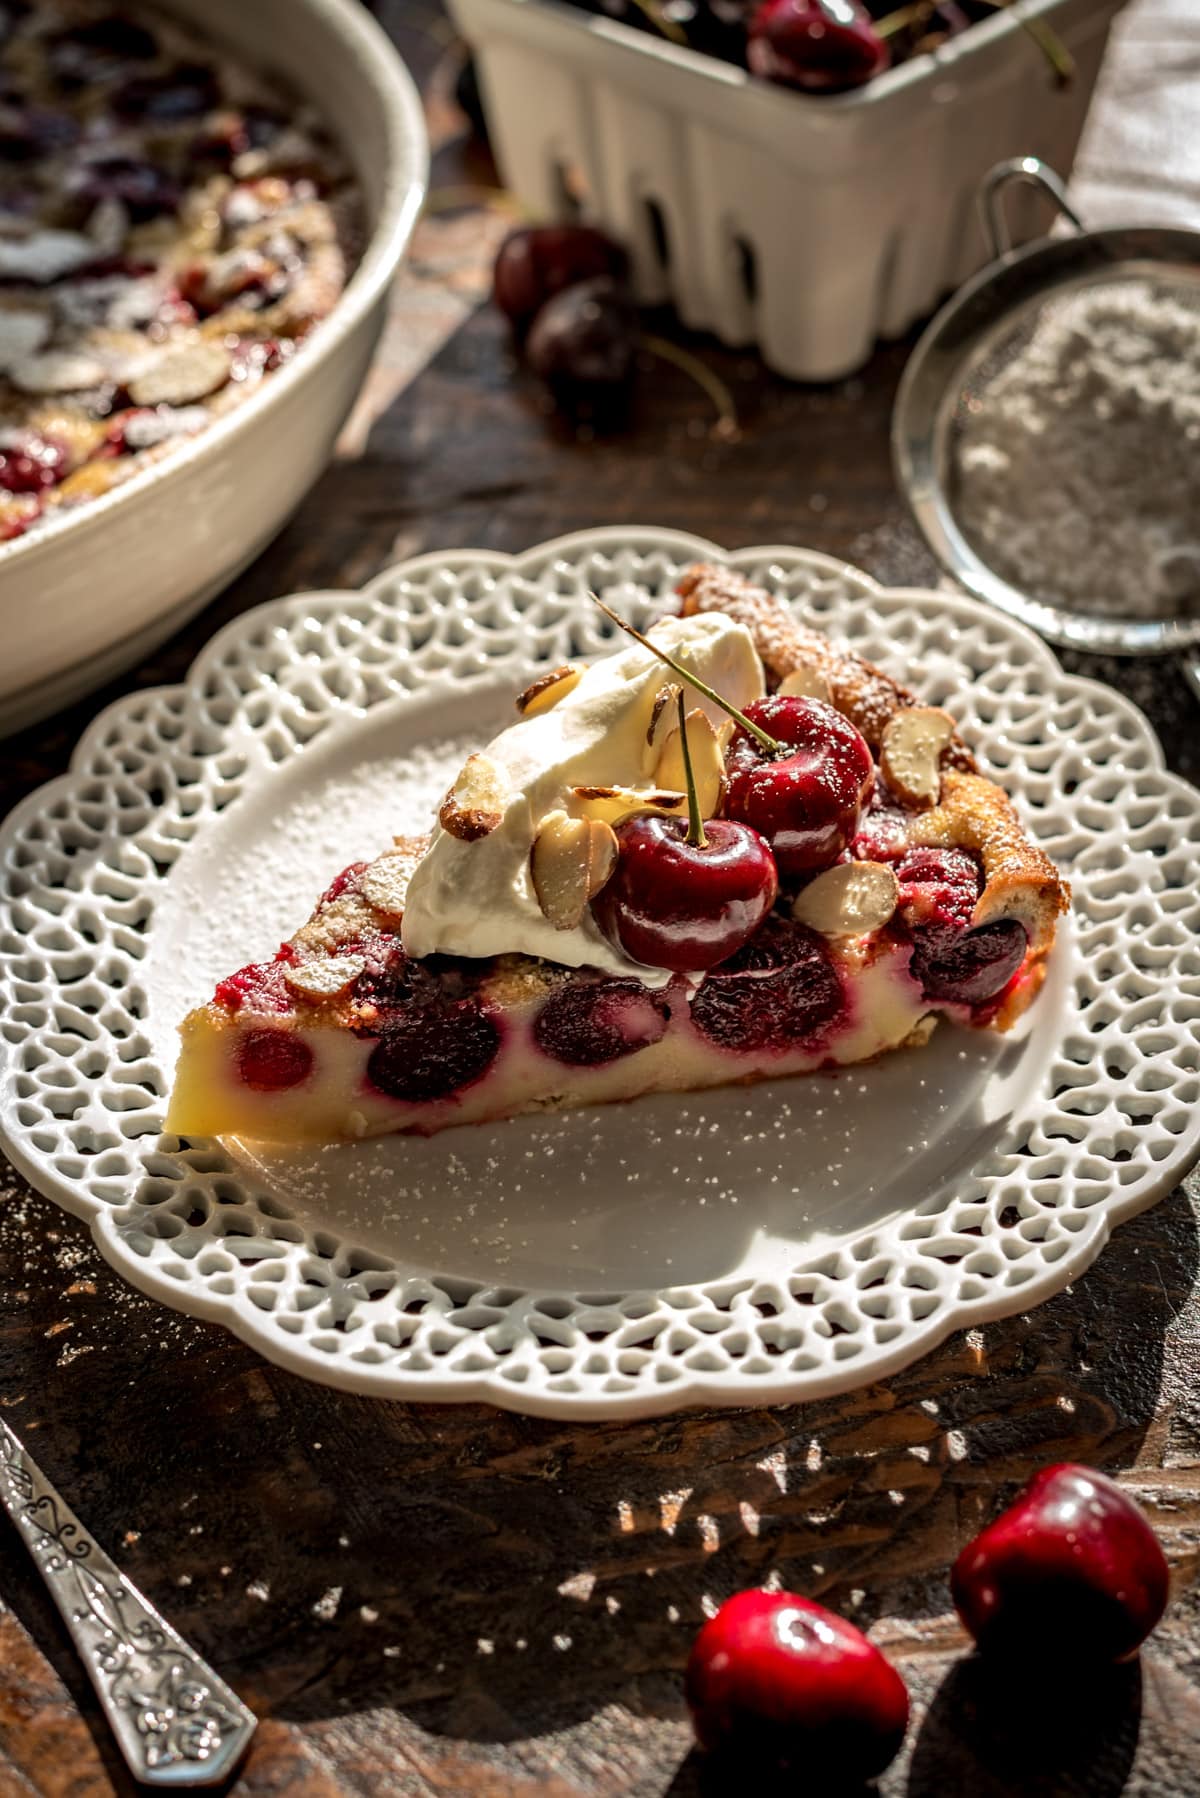 A sideview of a slice of cherry clafoutis showing the cherries encased in the baked custard.